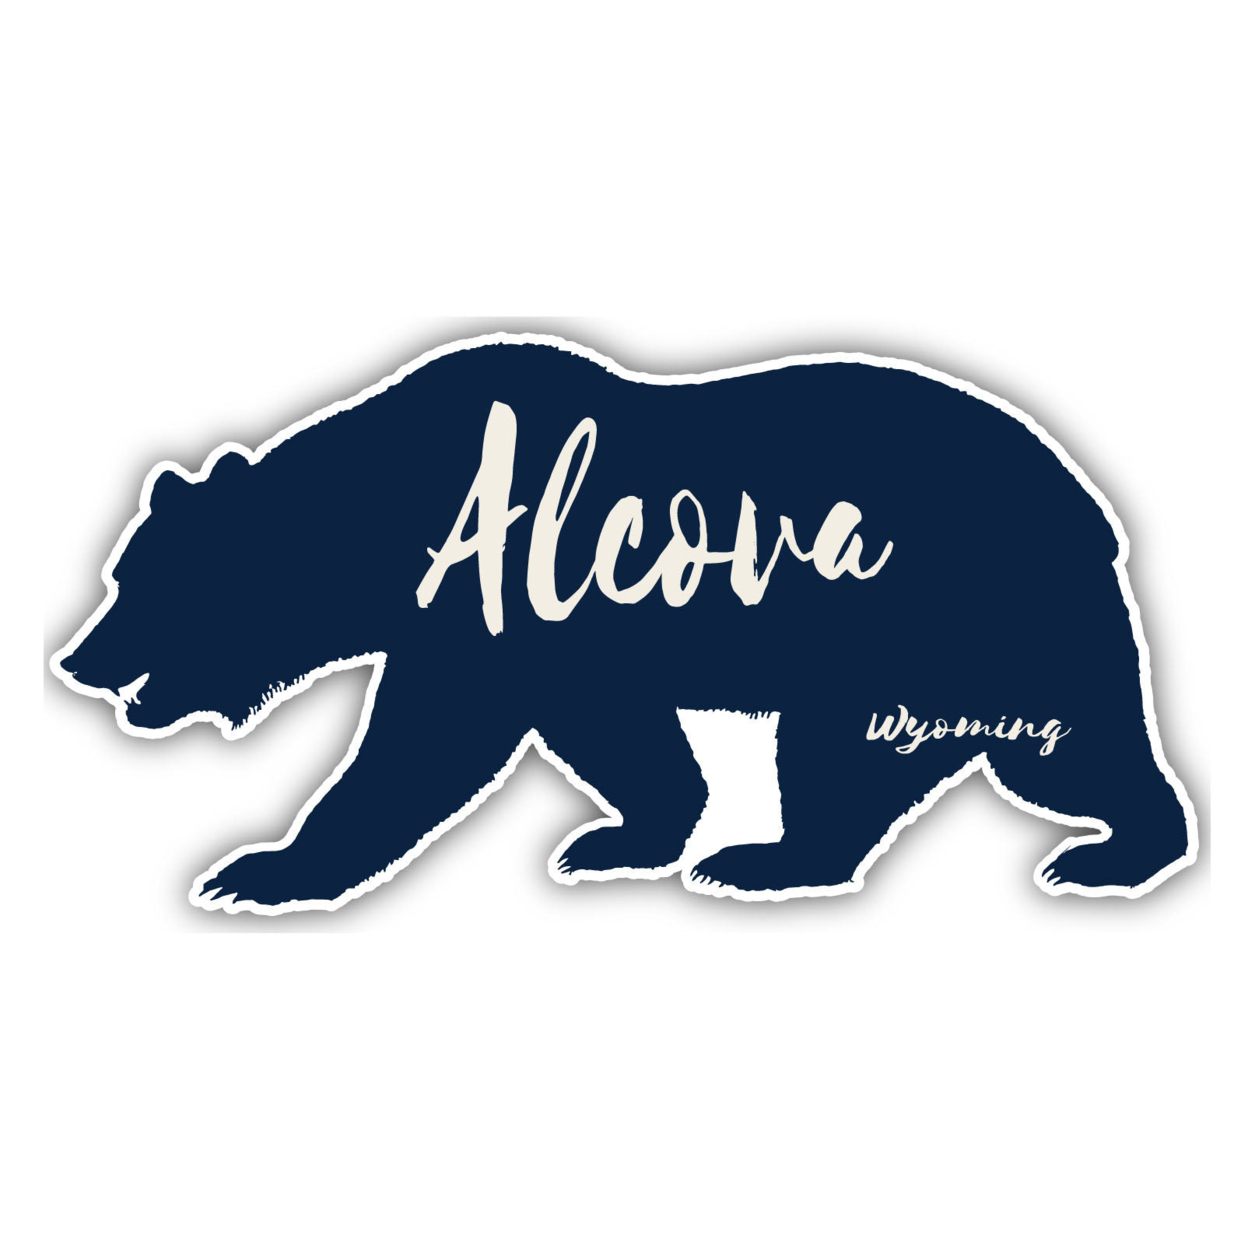 Alcova Wyoming Souvenir Decorative Stickers (Choose Theme And Size) - 4-Pack, 8-Inch, Camp Life